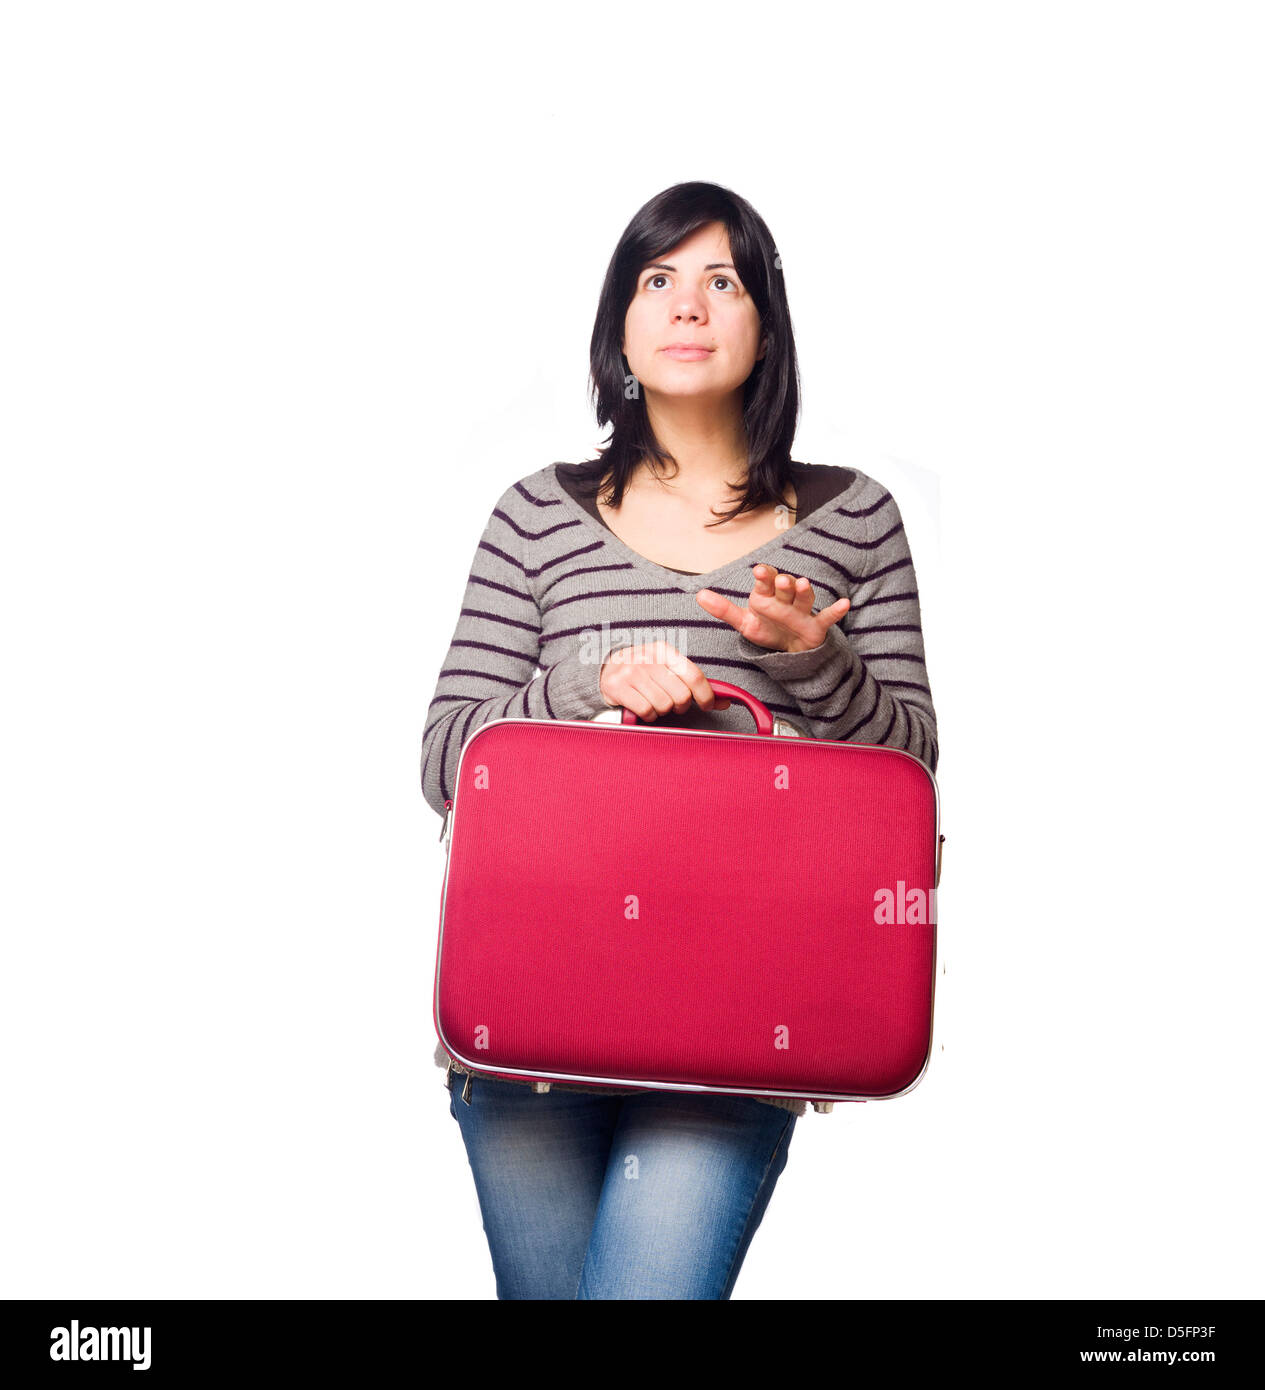 Portrait of pretty young woman holding a red suitcase isolated on white background Stock Photo